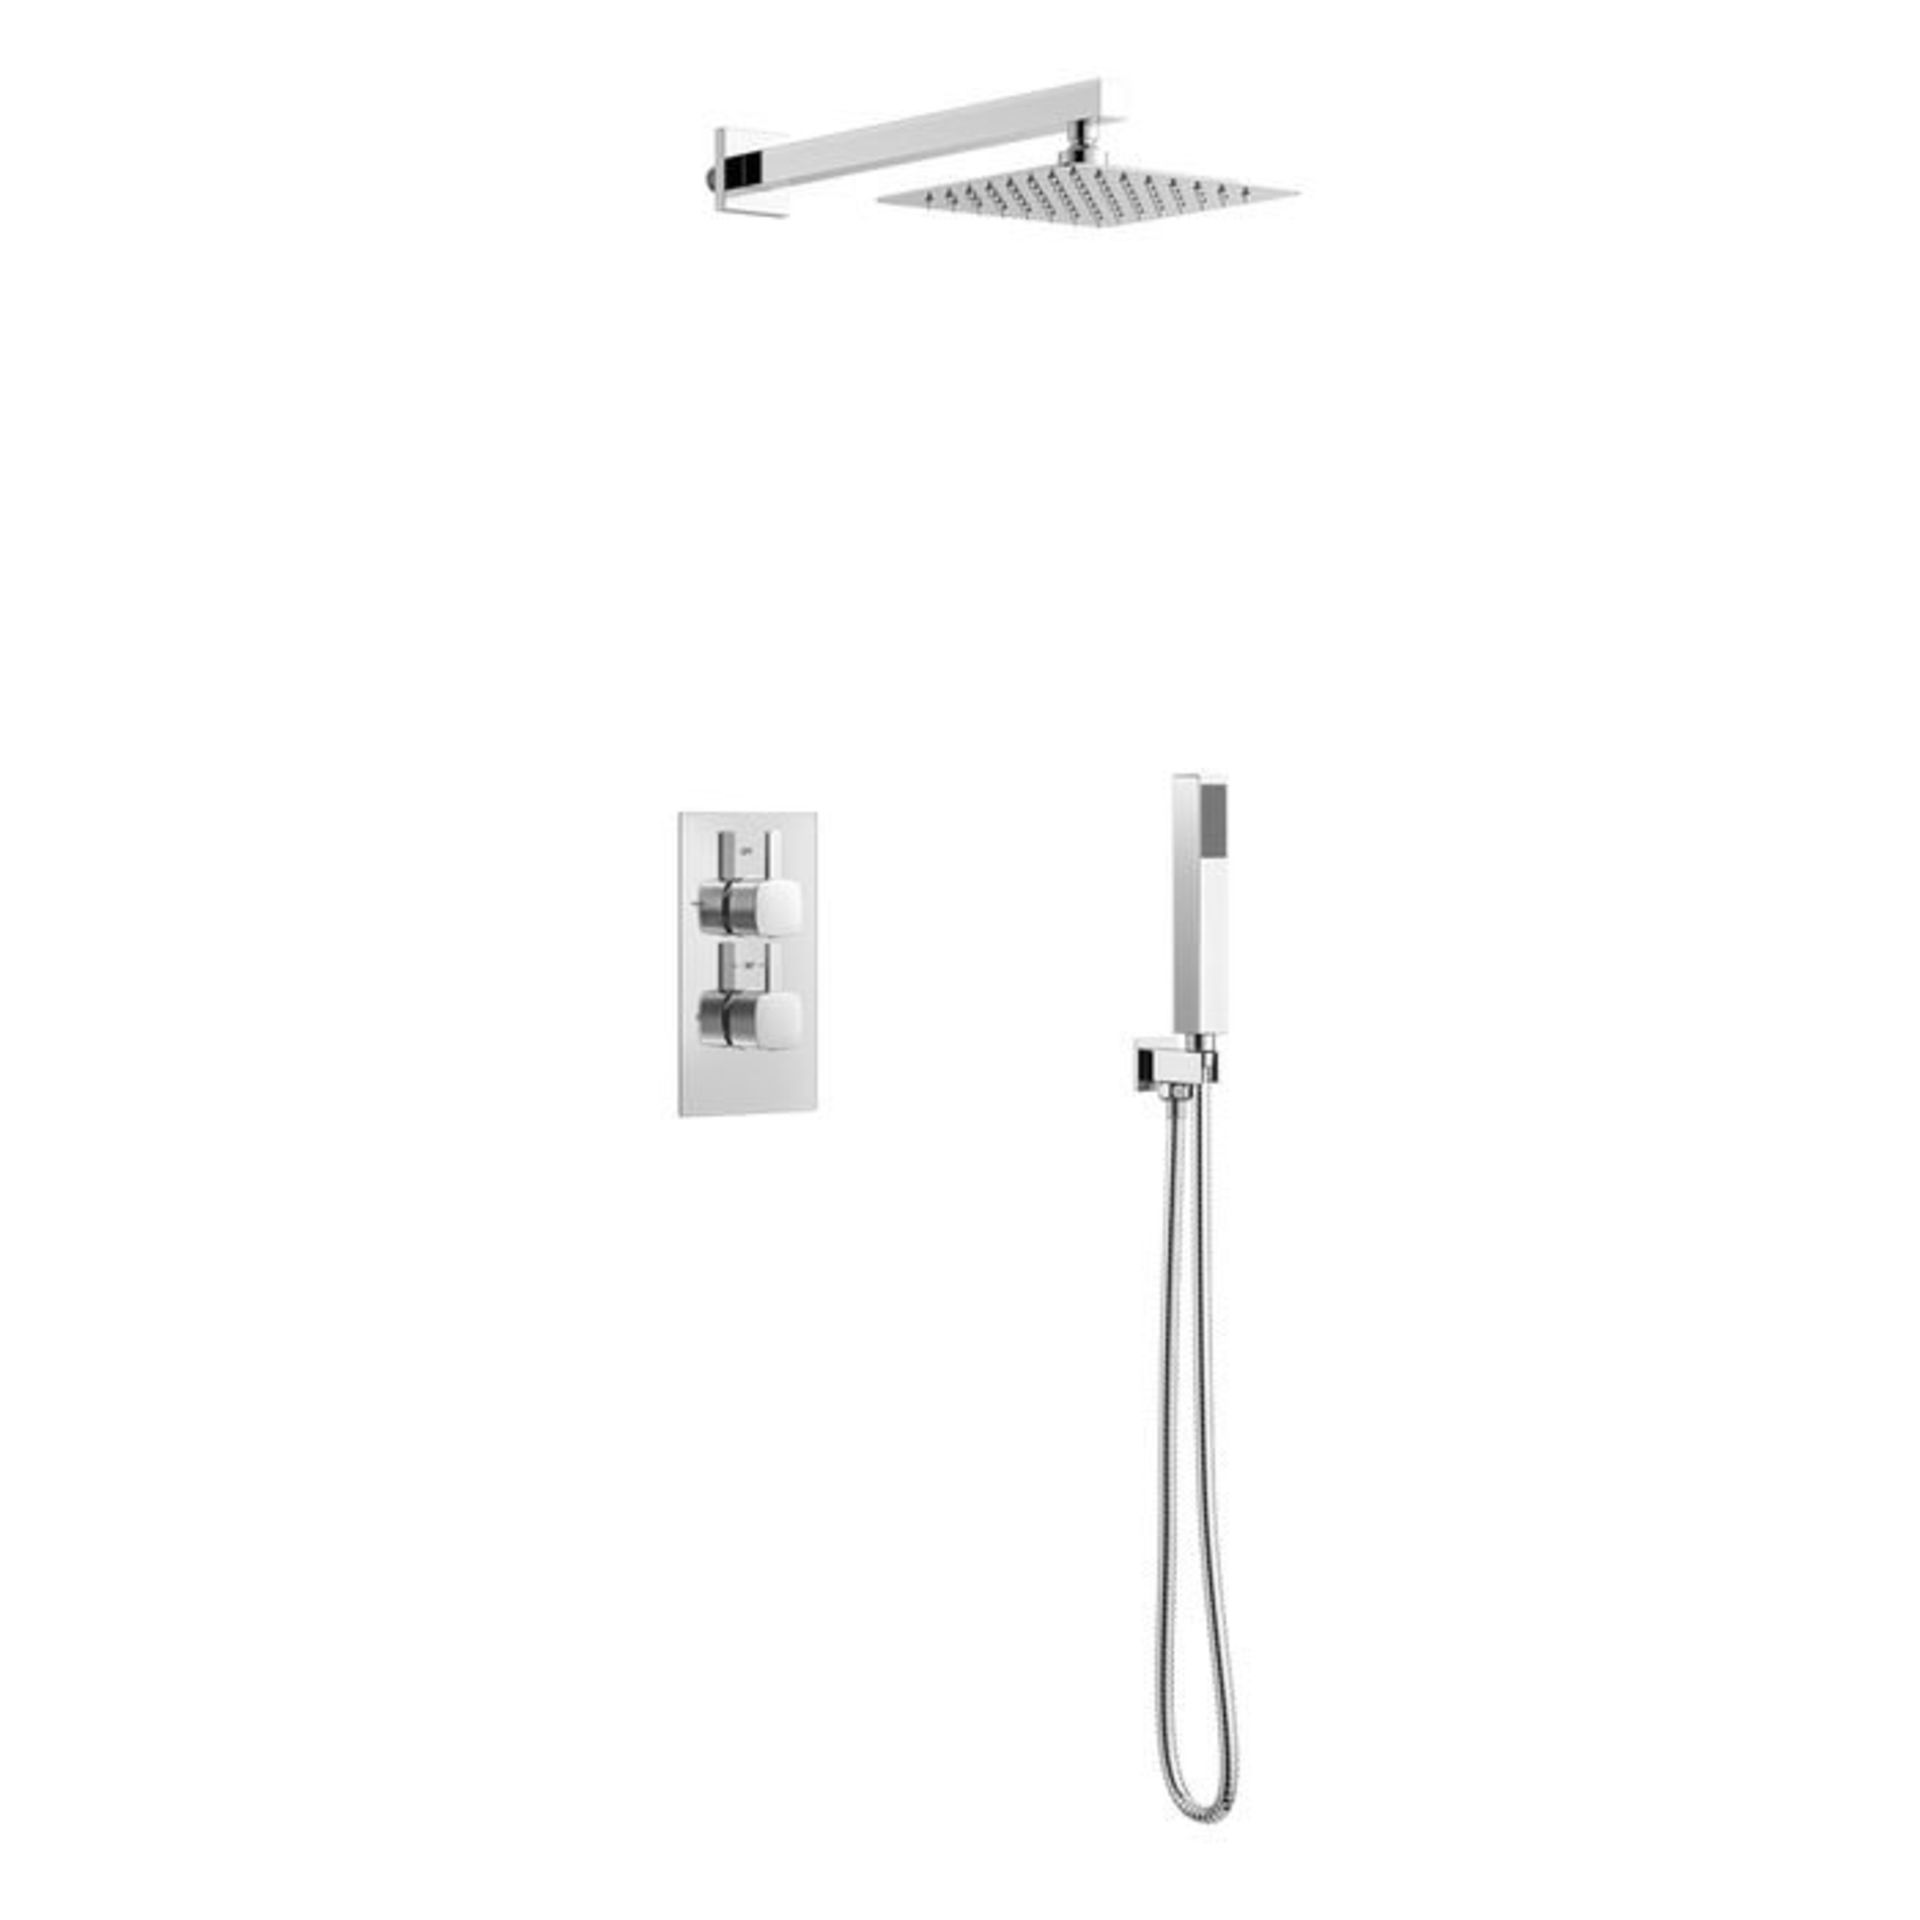 (H37) Square Concealed Thermostatic Mixer Shower Kit & Medium Head. Family friendly detachable - Image 3 of 6